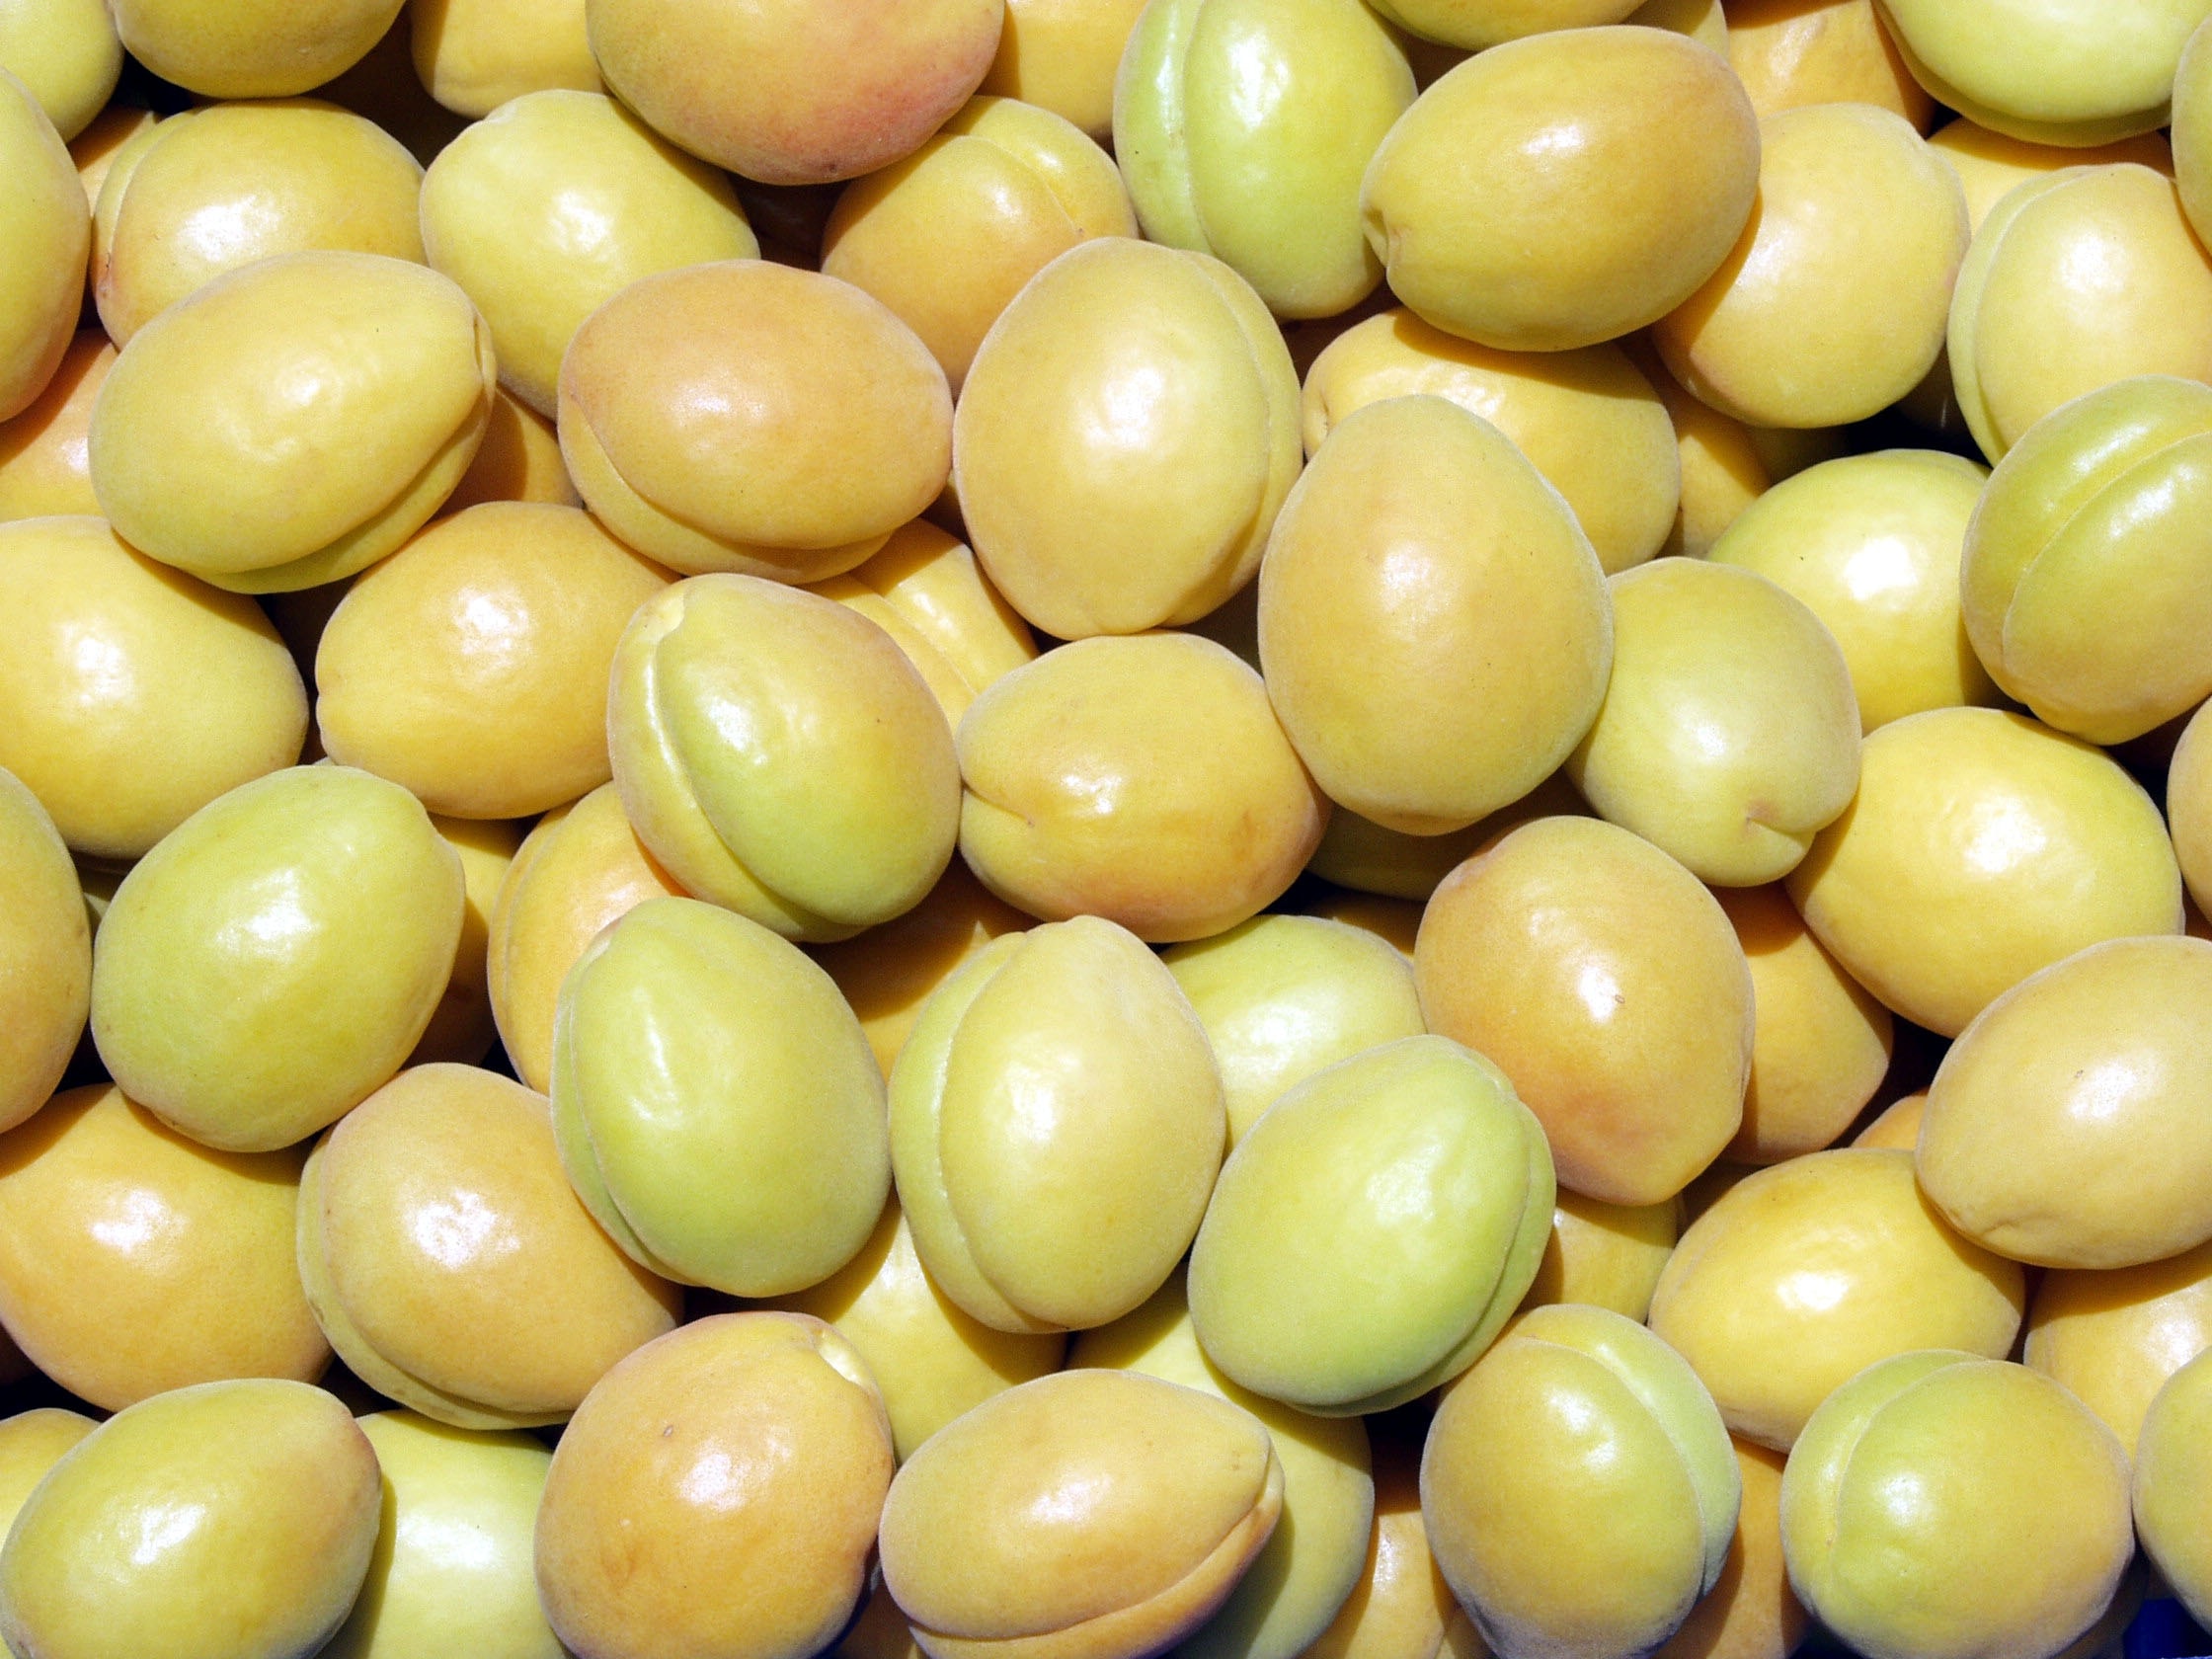 yellow and brown oval fruit